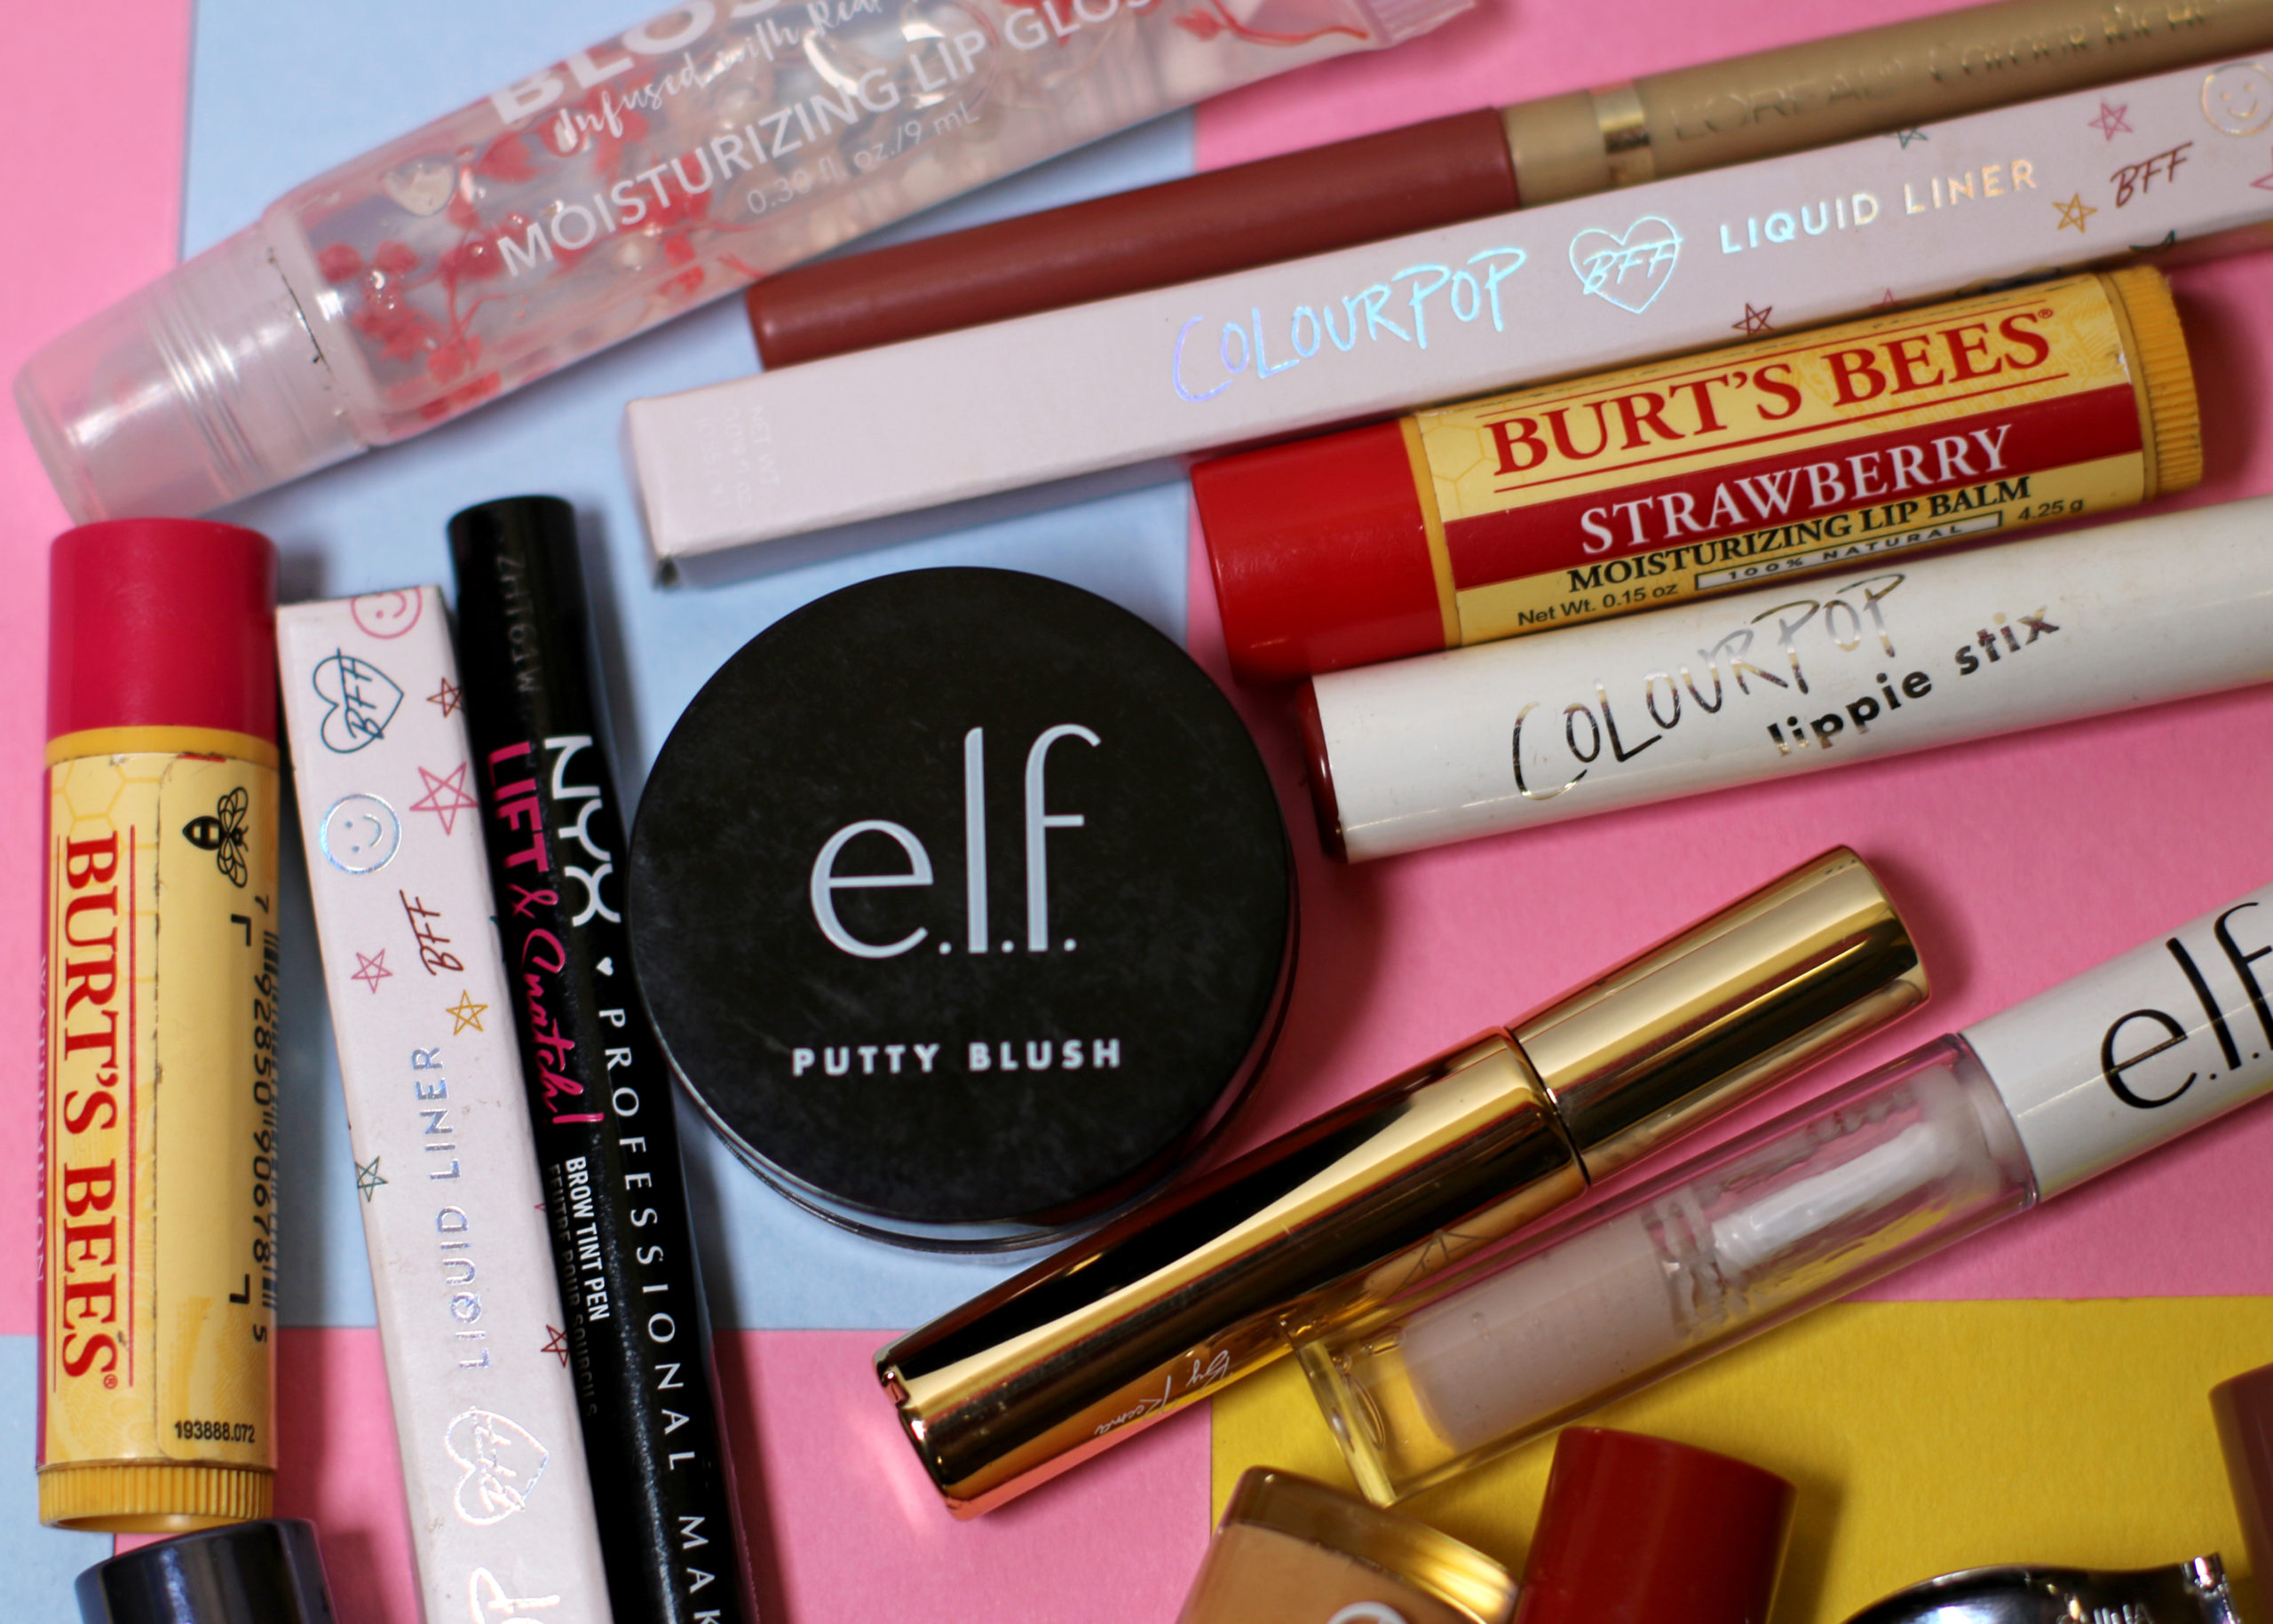 Various products are spread out, including e.l.f, Burt's Bees, ColourPop and NYX.